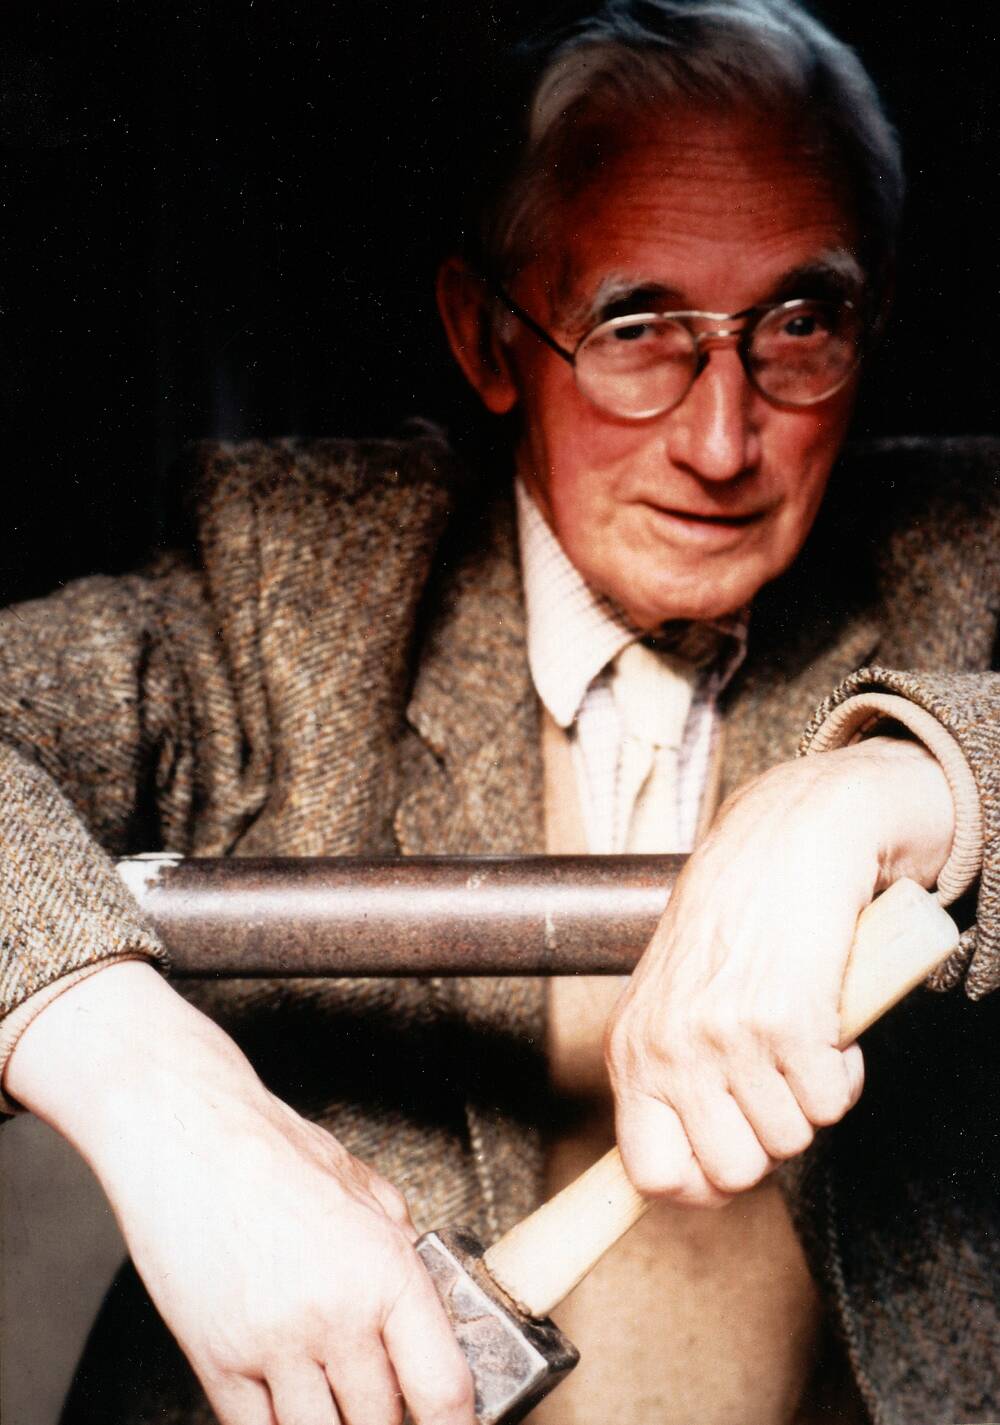 An old colour photo of Hew Lorimer, who stands and rests his arms over a metal railing. He is holding a small mallet in both hands. He wears glasses and a brown tweed jacket. He has a wry smile.